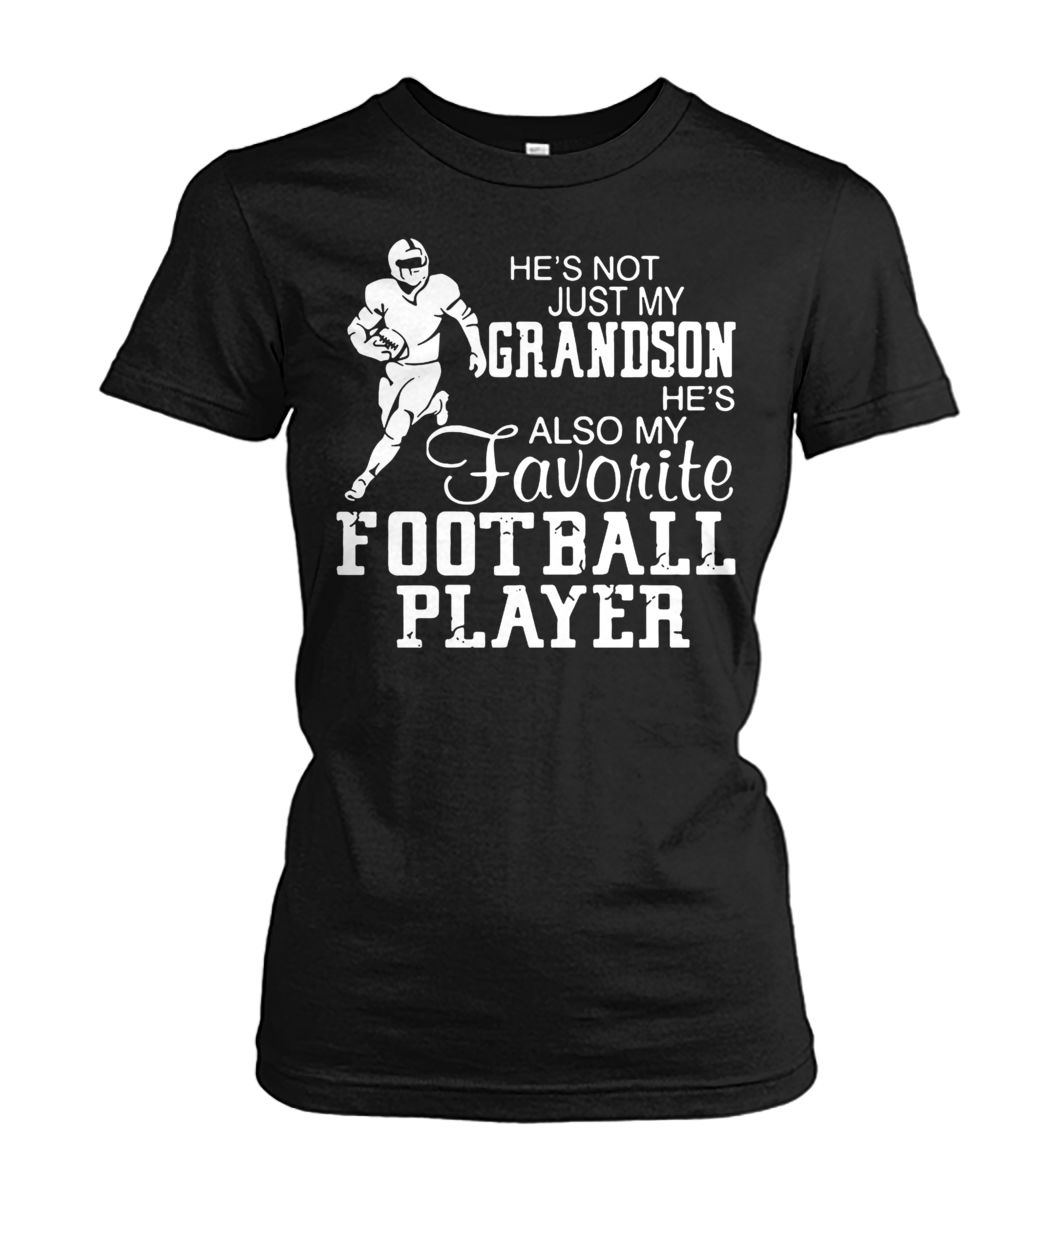 He’s not just my grandson he’s also my favorite football player women's crew tee